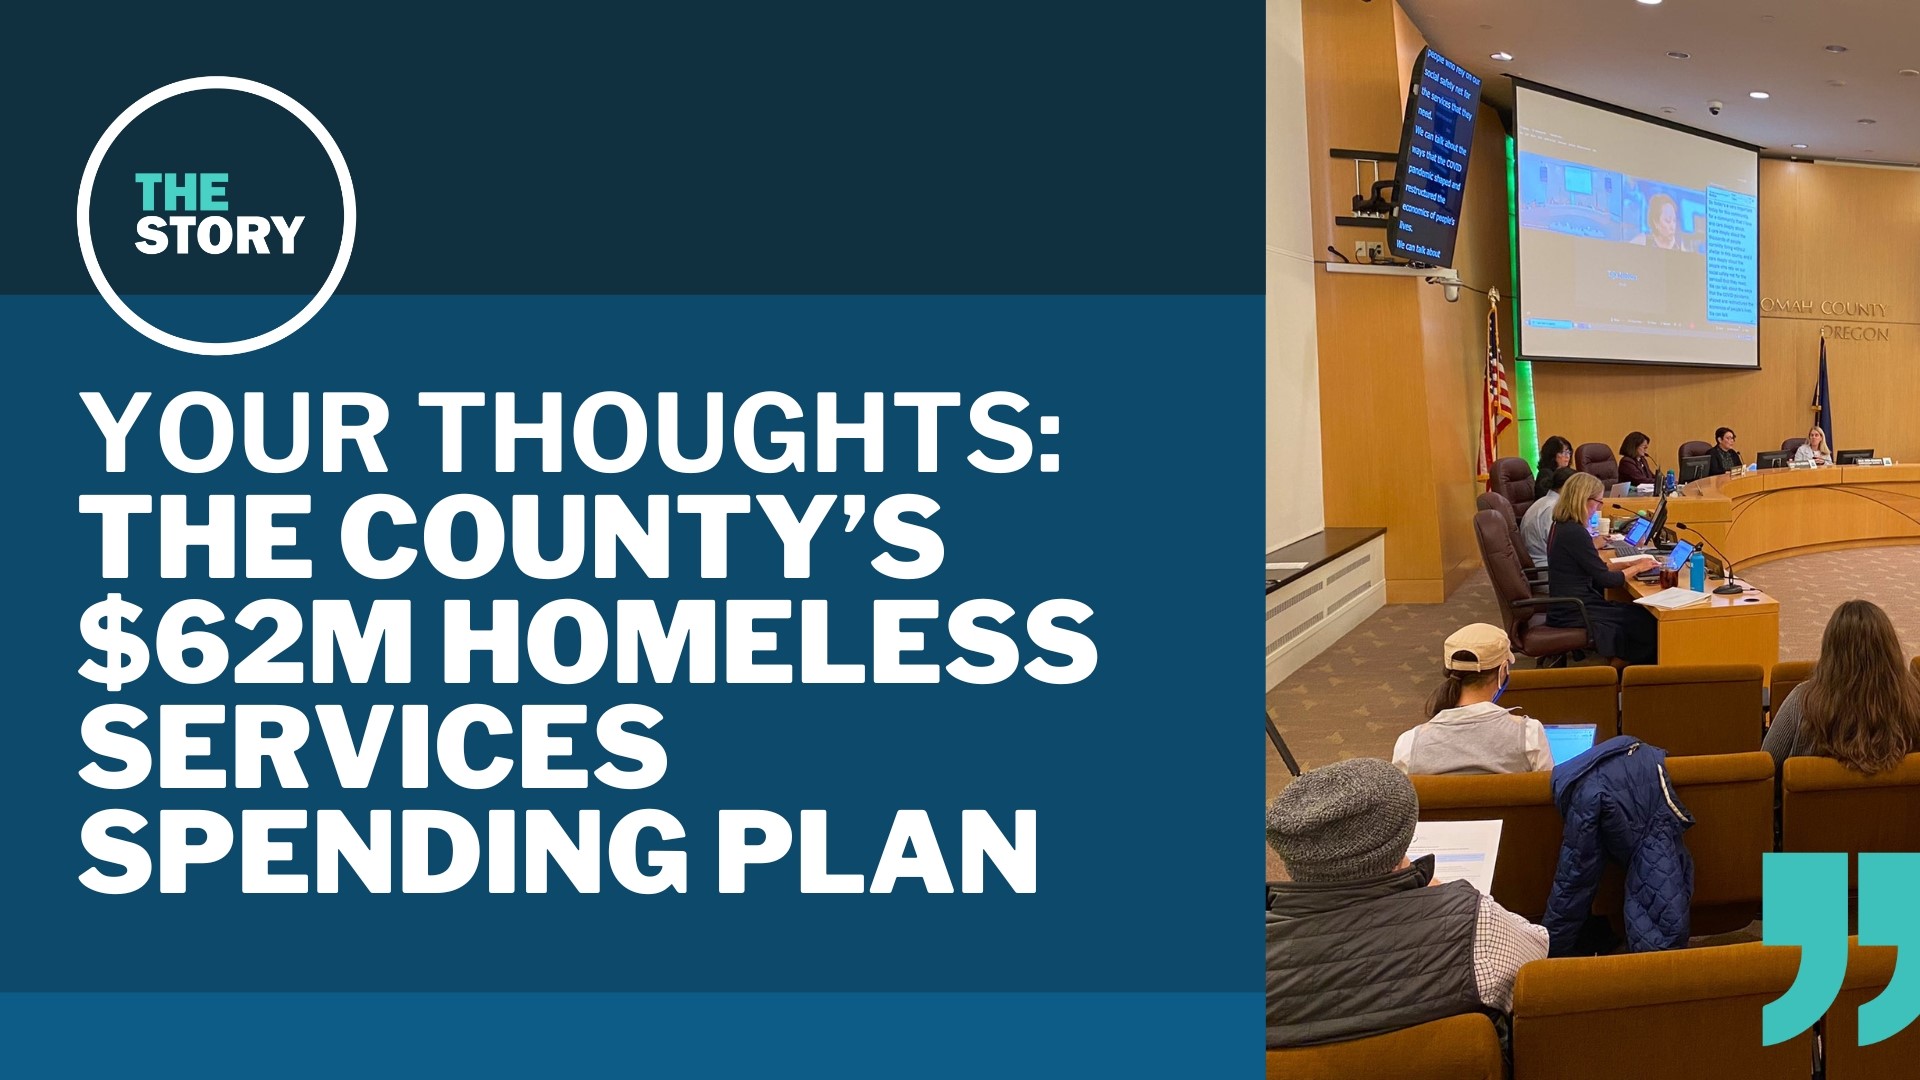 After some heated debate, Multnomah County commissioners passed a plan for its unspent homeless services funds. Here's what you had to say.